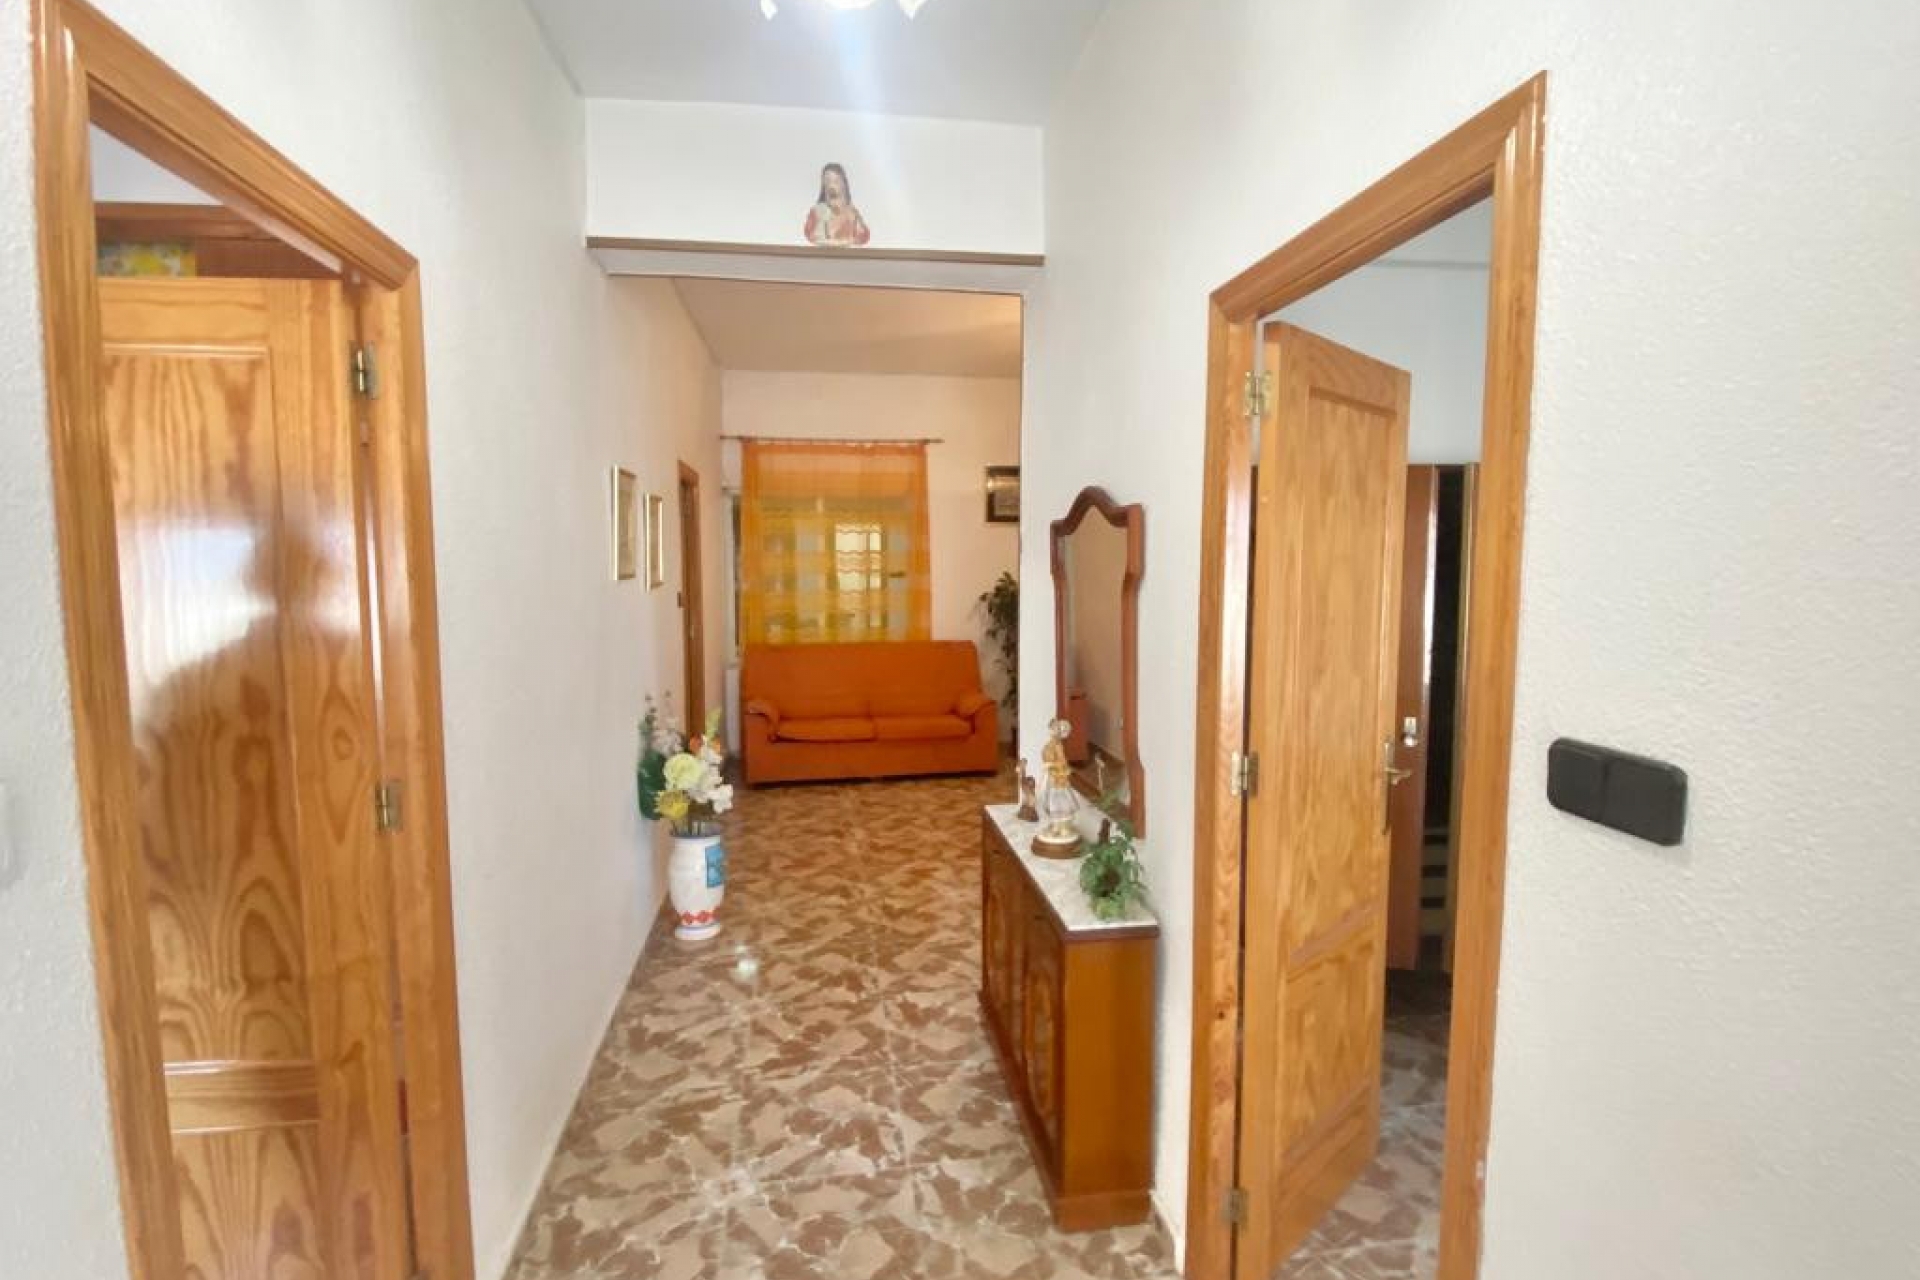 Property for sale - Townhouse for sale - Bigastro - Bigastro Town